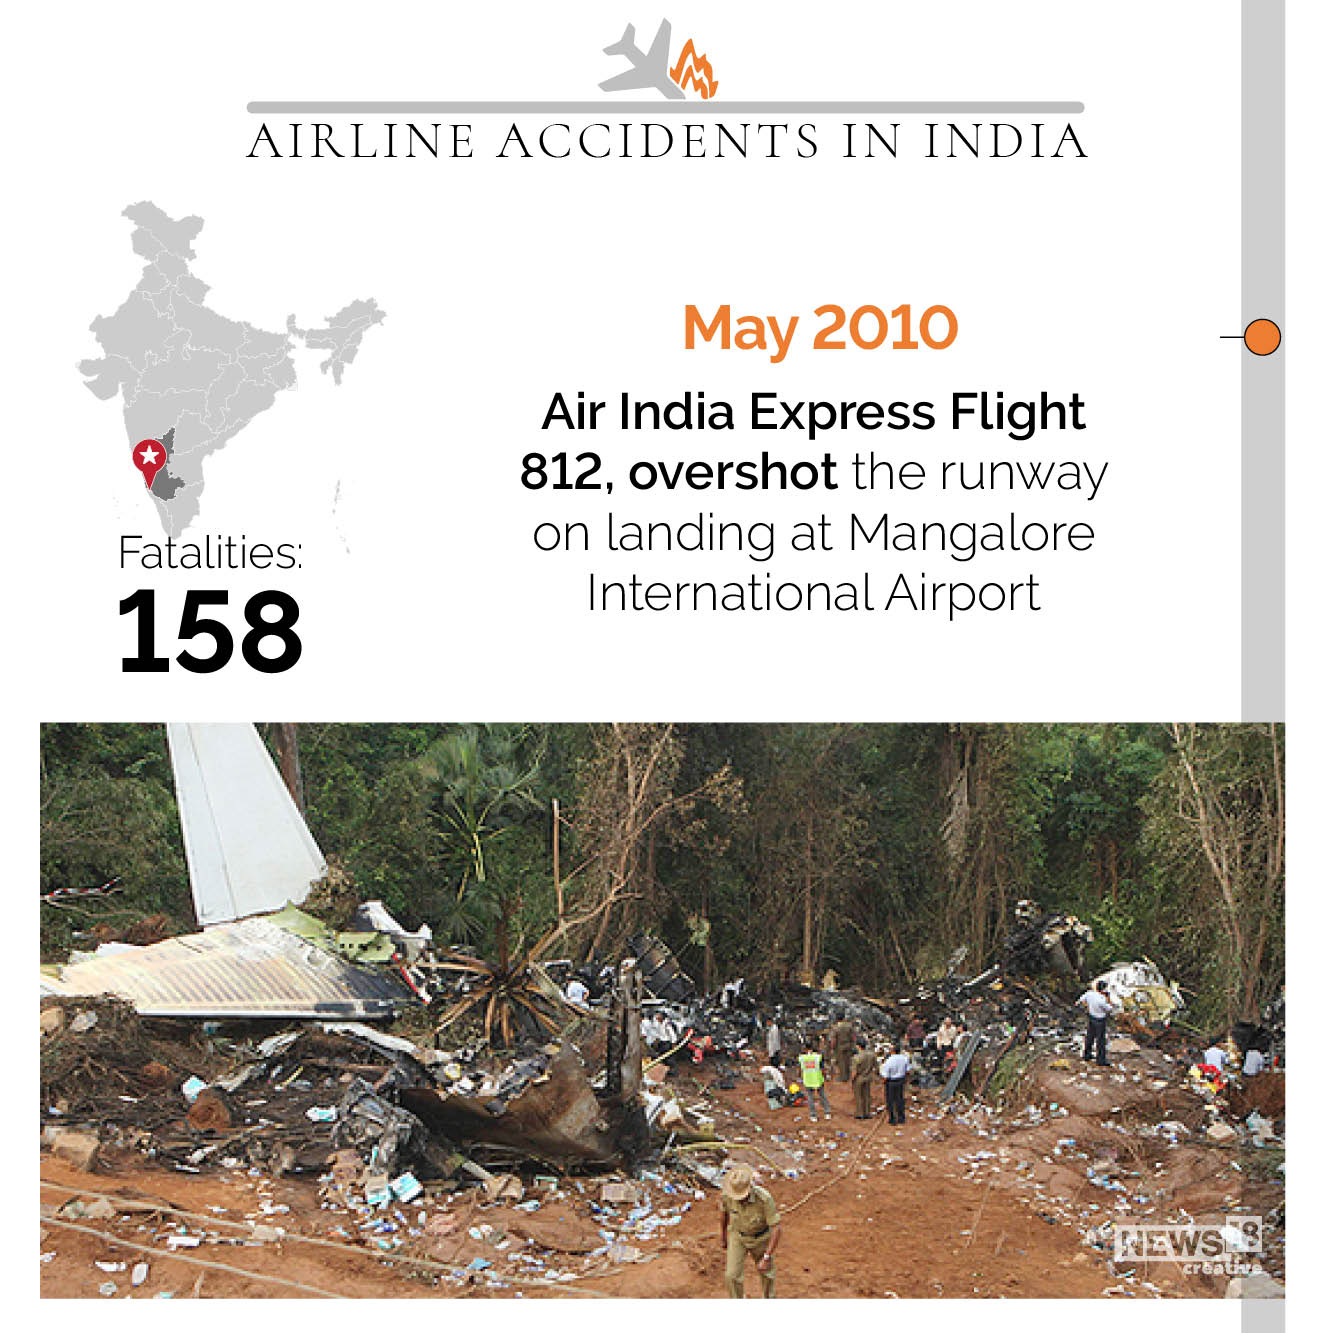 Kerala air crash: A look at India's history with plane accidents